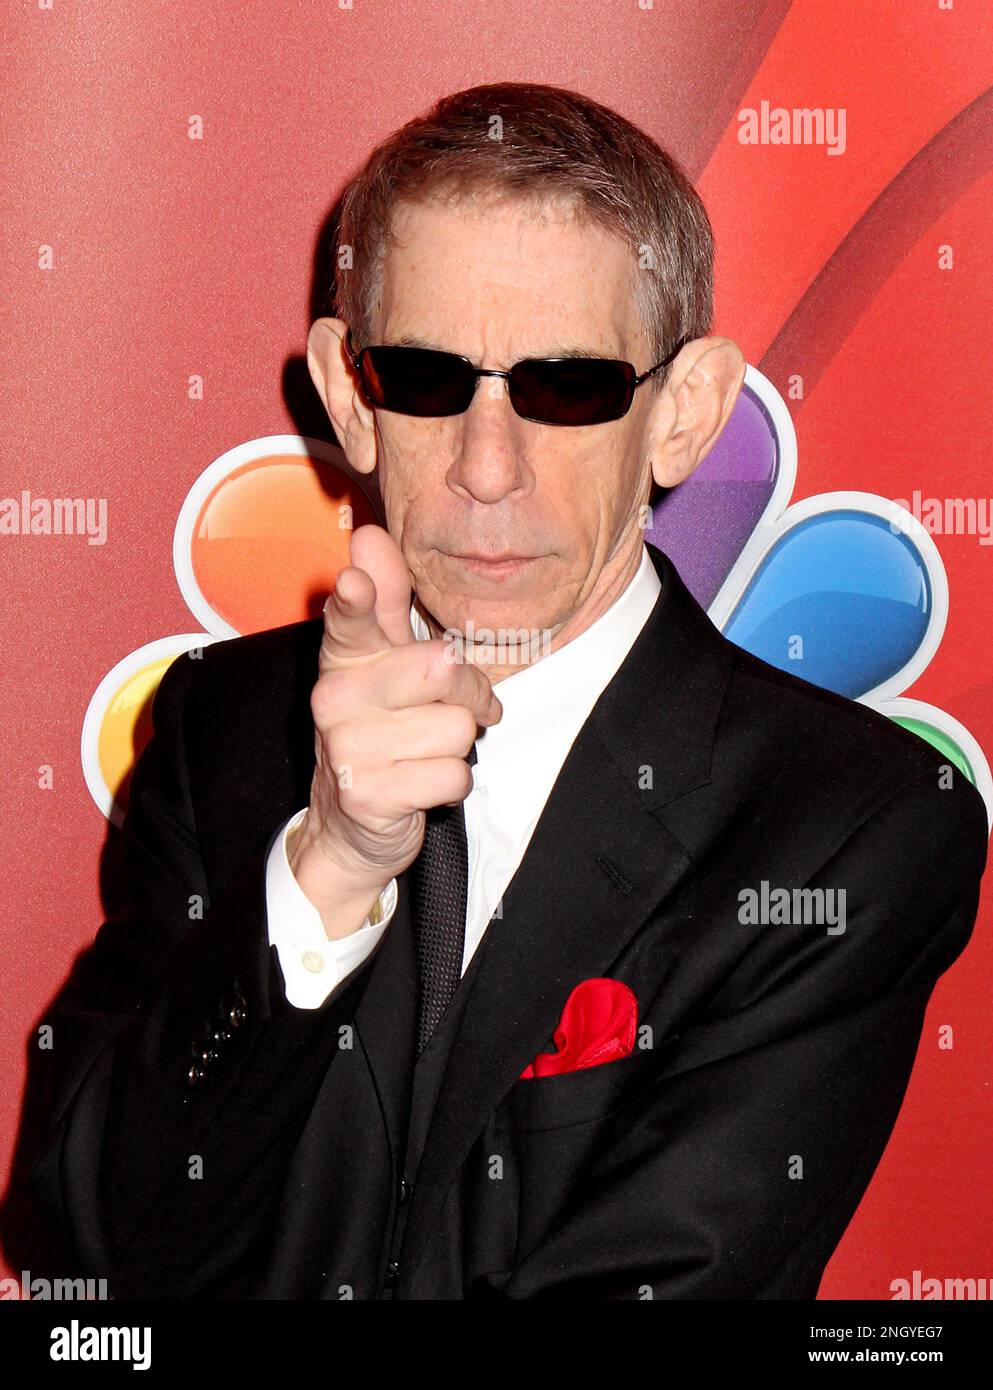 Law & Order: SVU” actor and comedian Richard Belzer passed away peacefully  at 78 years old on February 19, 2023 in France. Richard Belzer NBC's 2013  Upfront Presentation held at Radio City